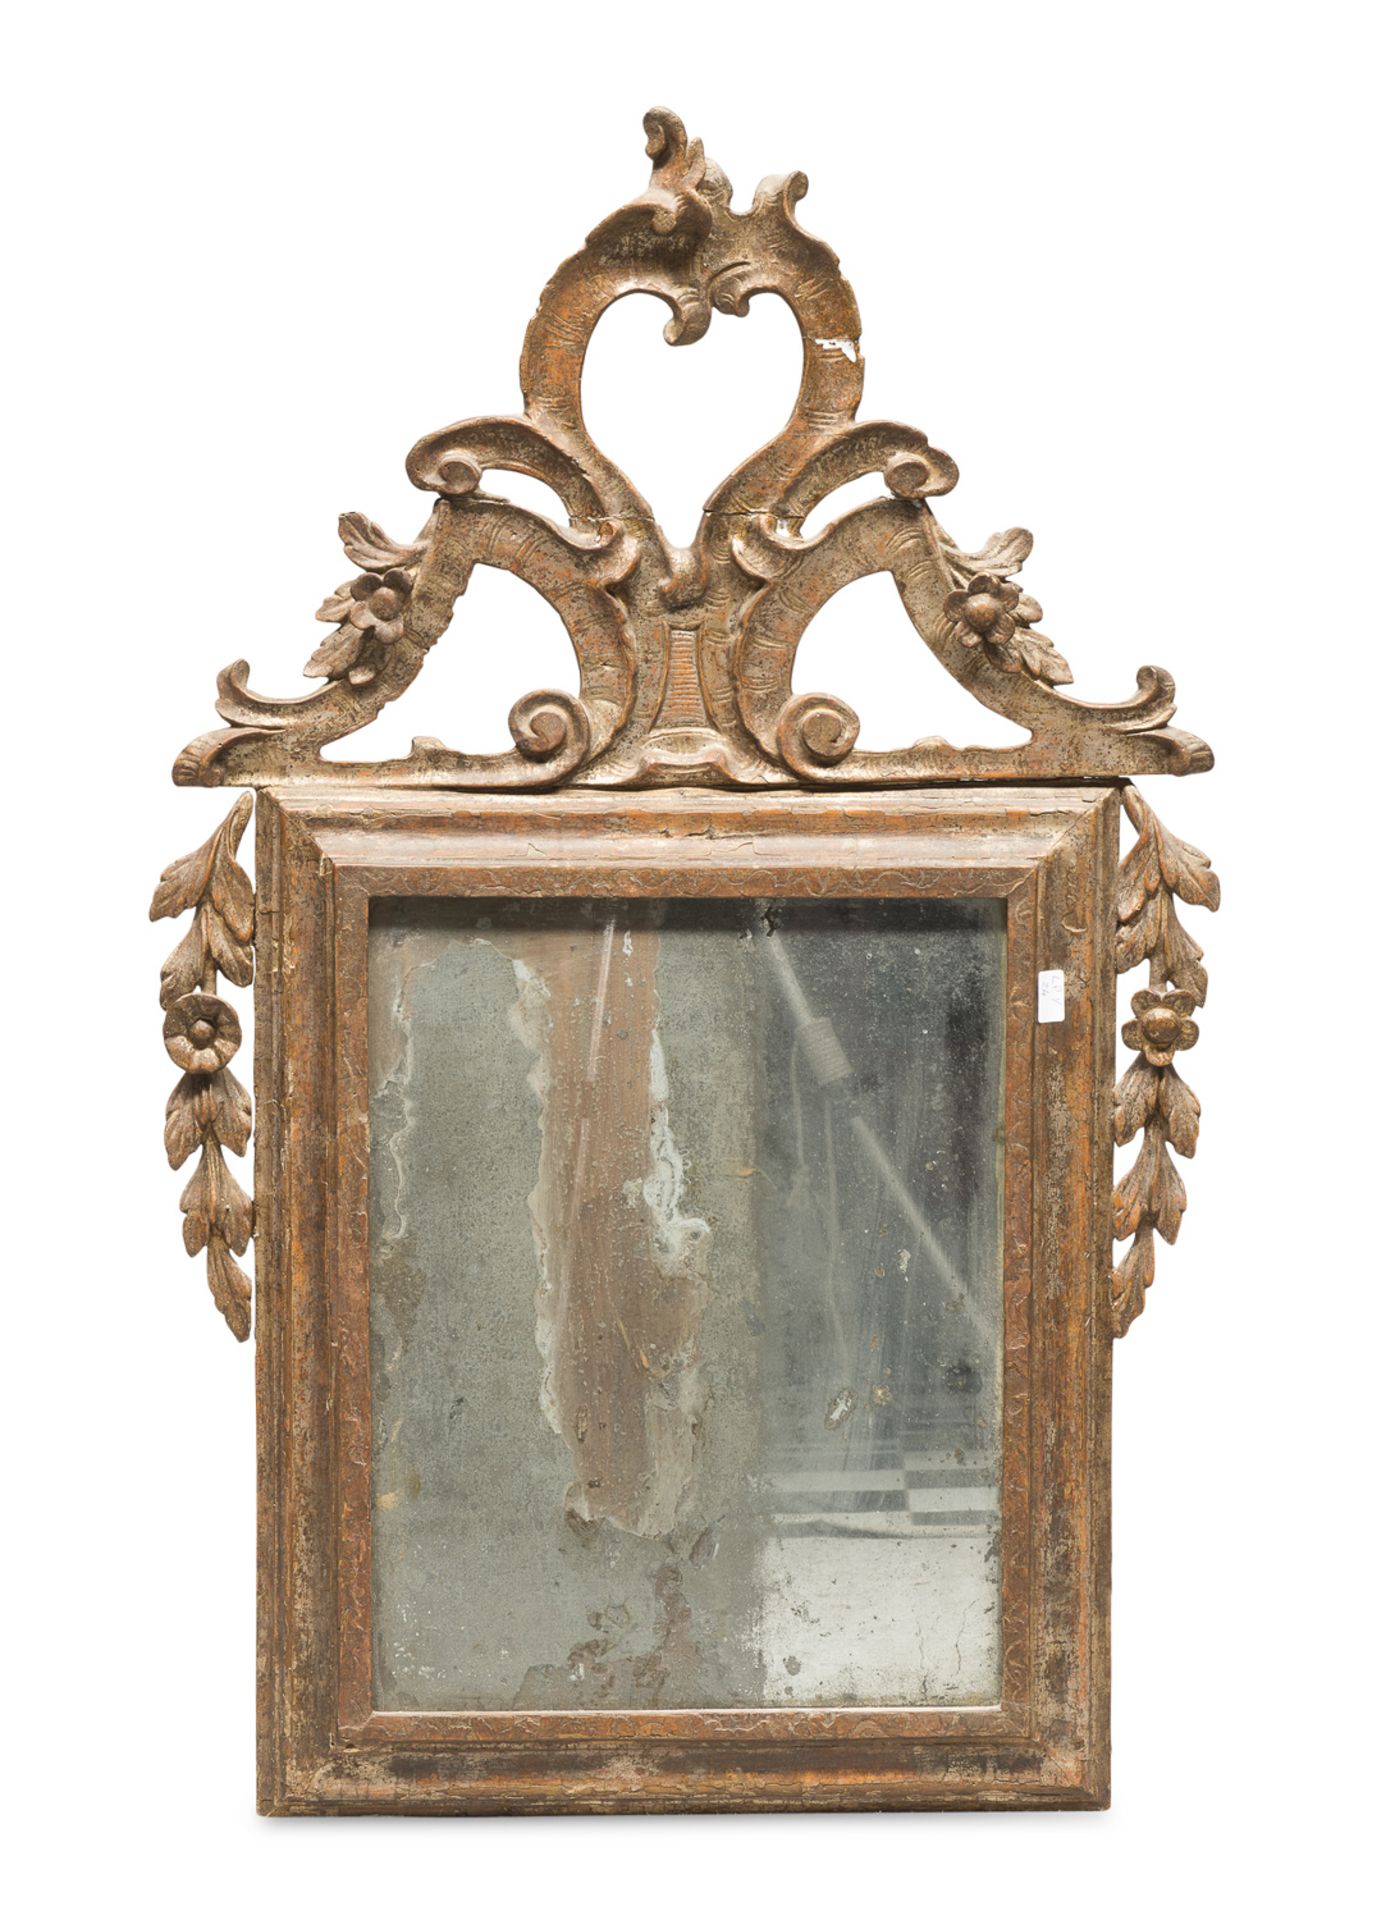 SMALL MIRROR IN GILTWOOD CENTRAL ITALY 18th CENTURY